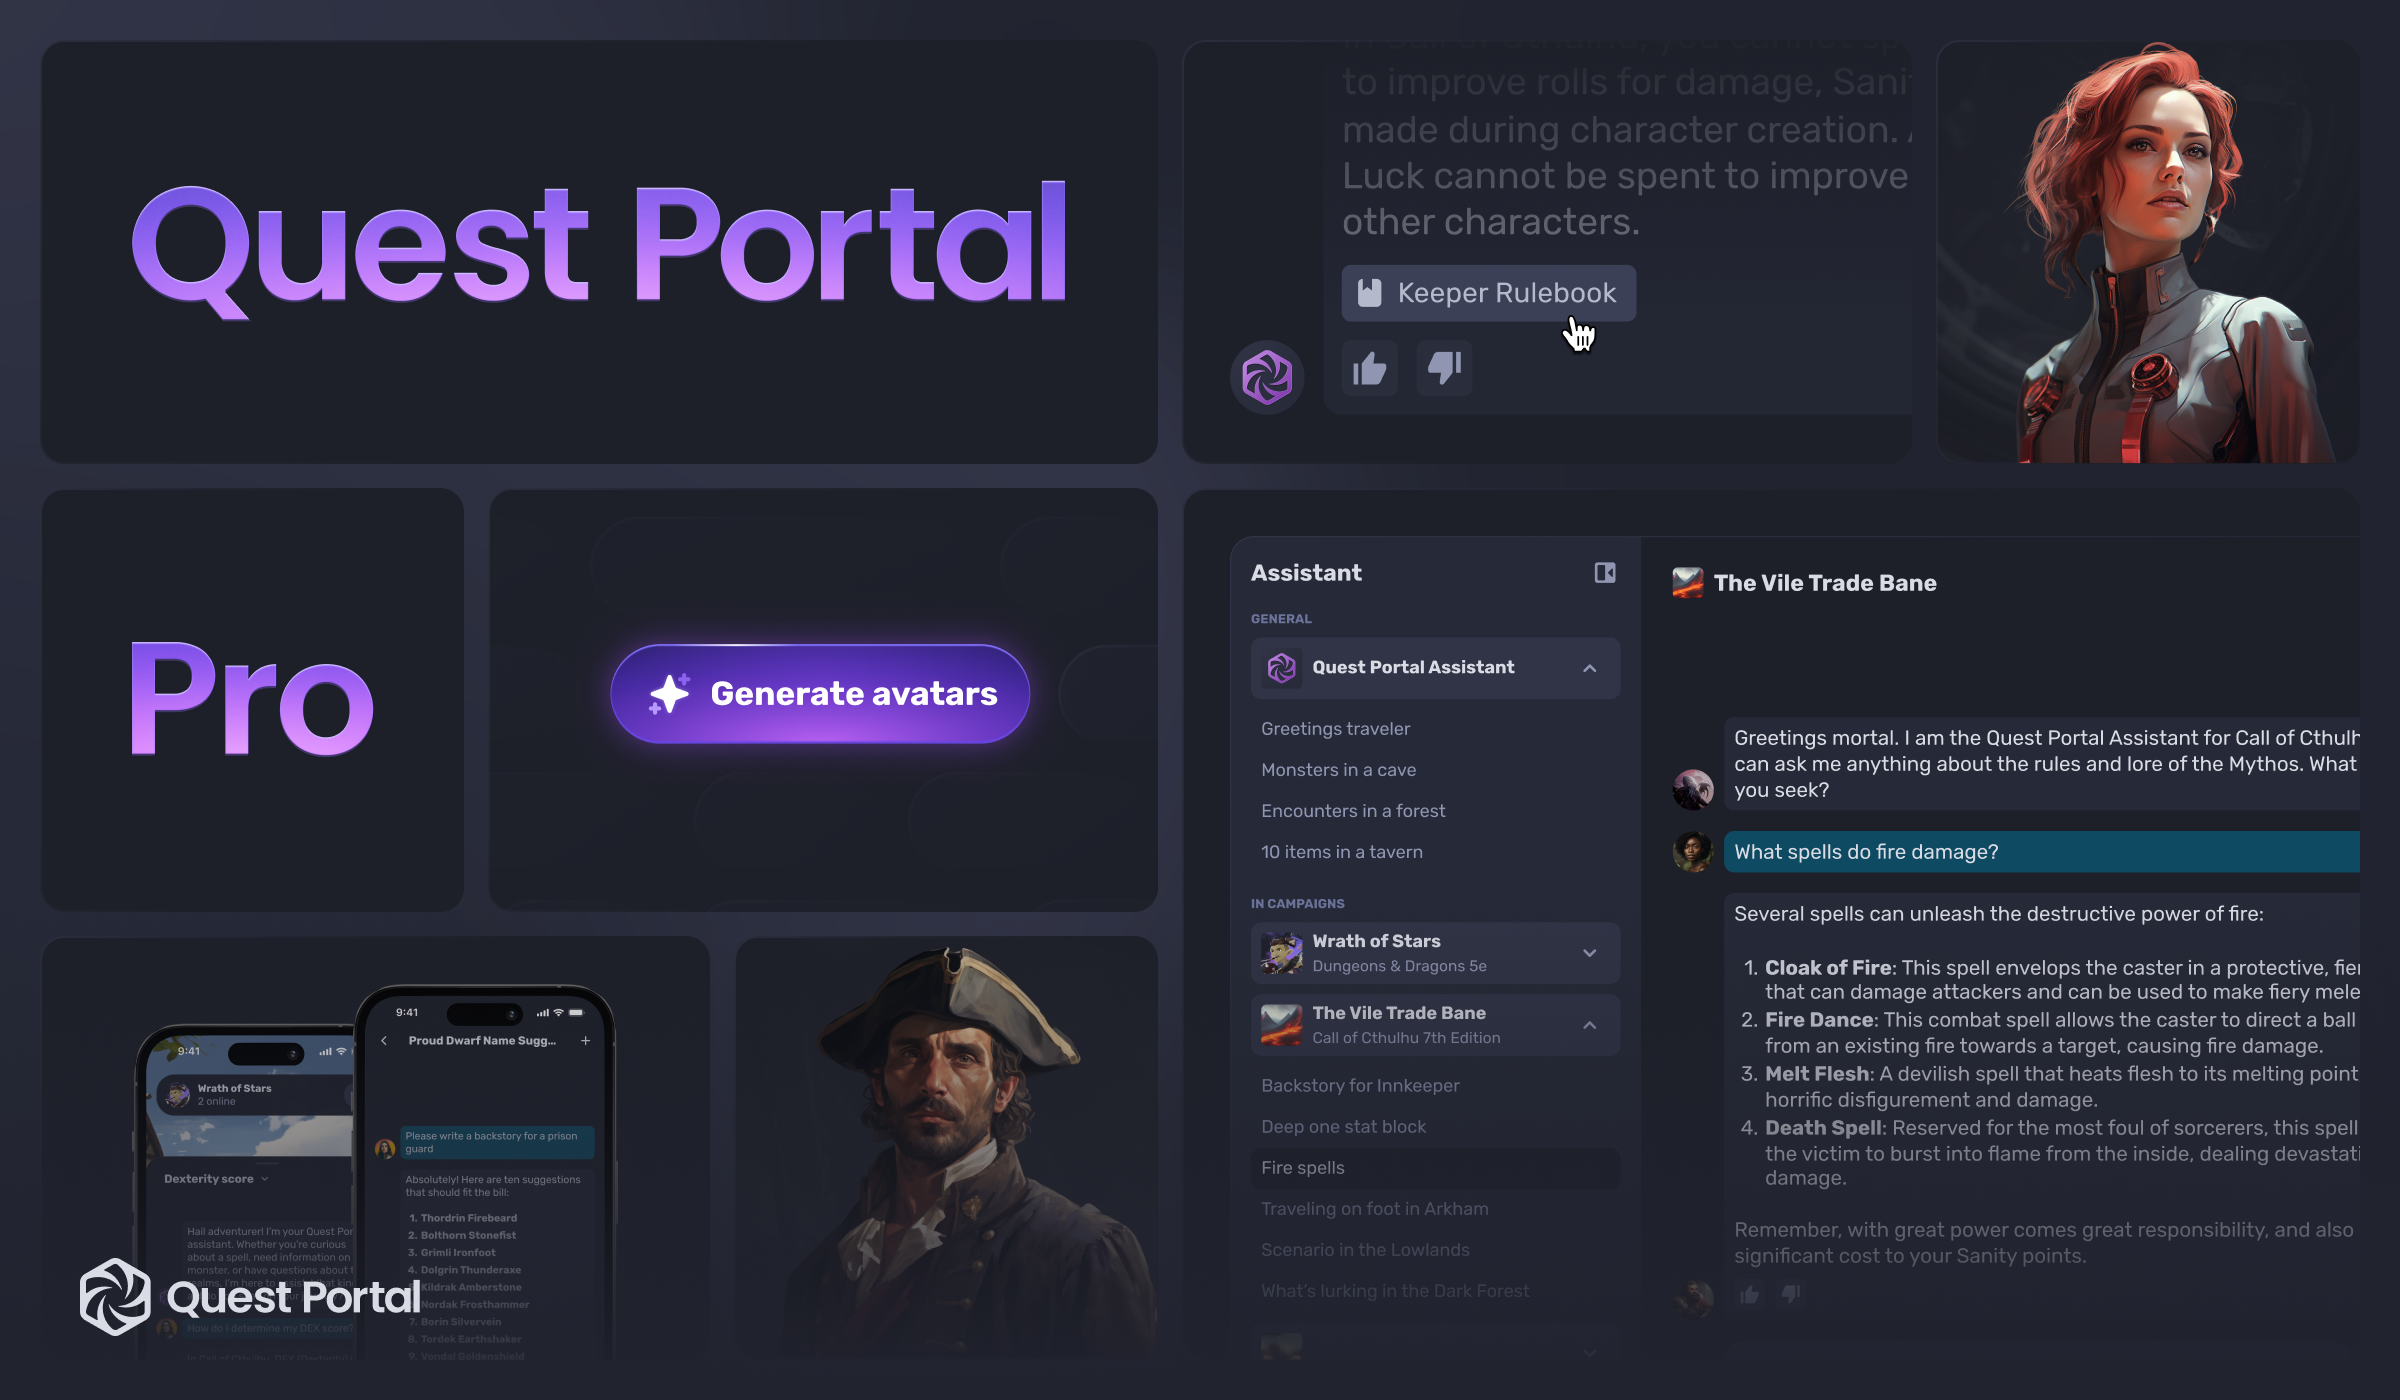 Image of Quest Portal Pro's features. The Assistant, Library Link and Avatar Generator